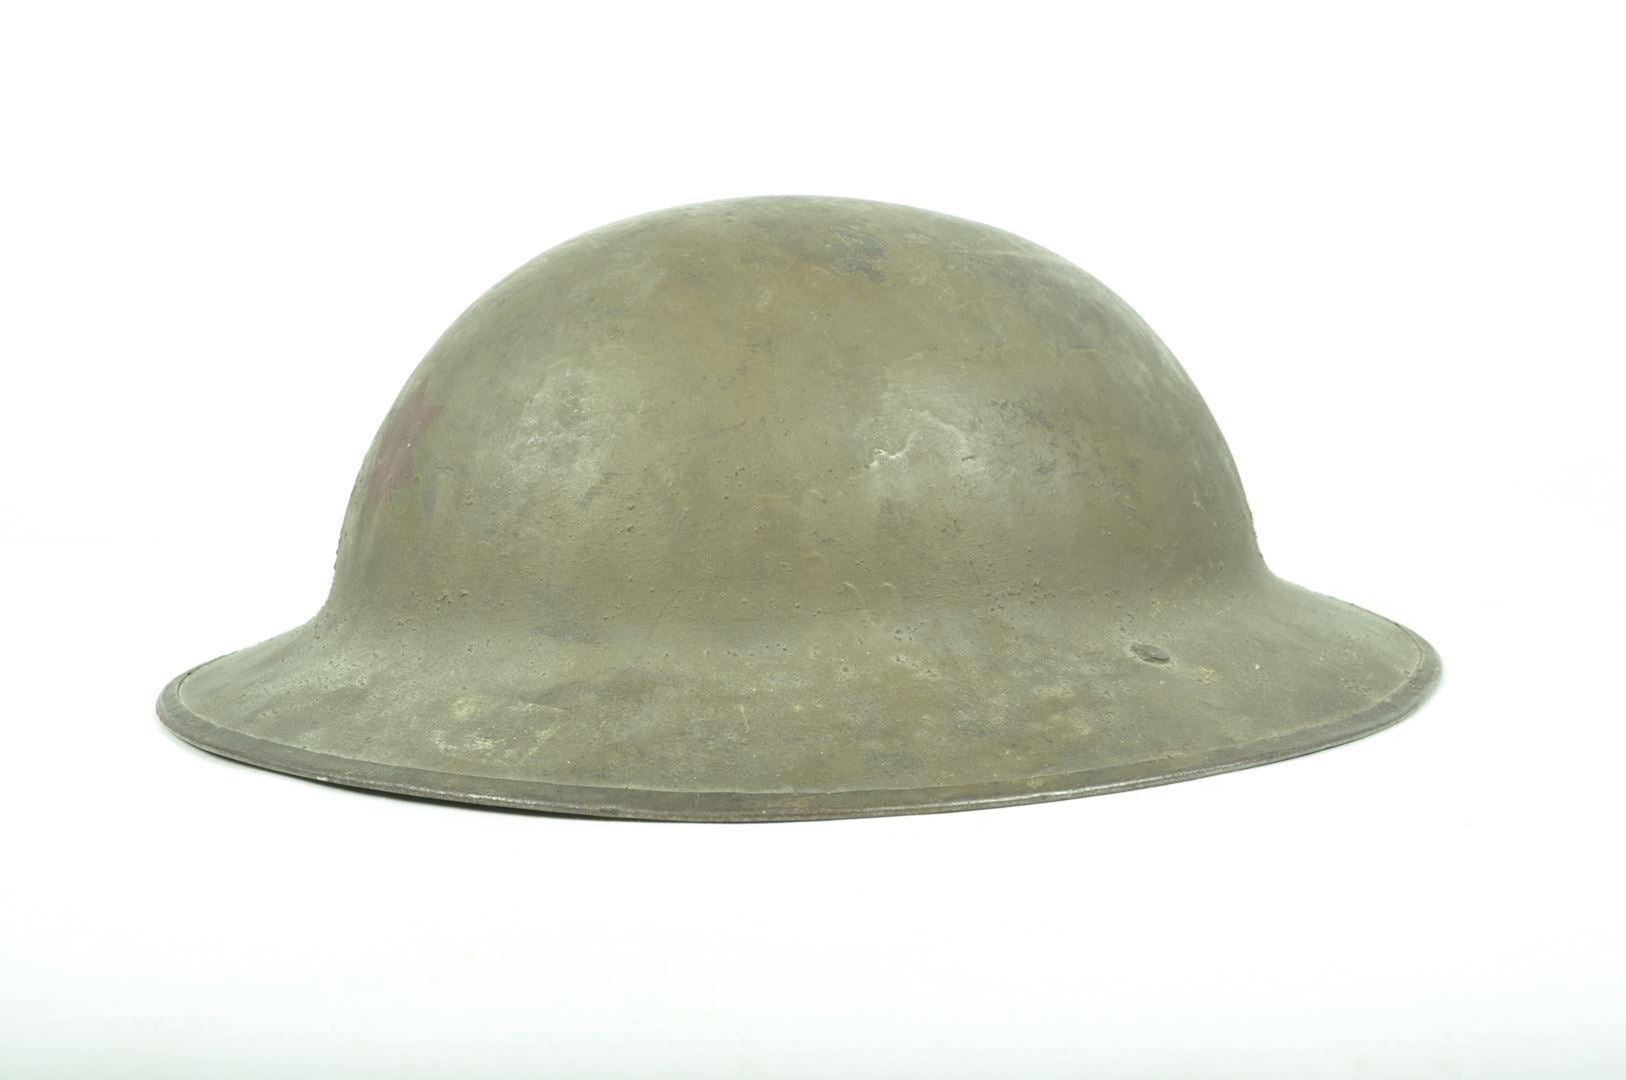 Casque US 17 / 6th infantry division